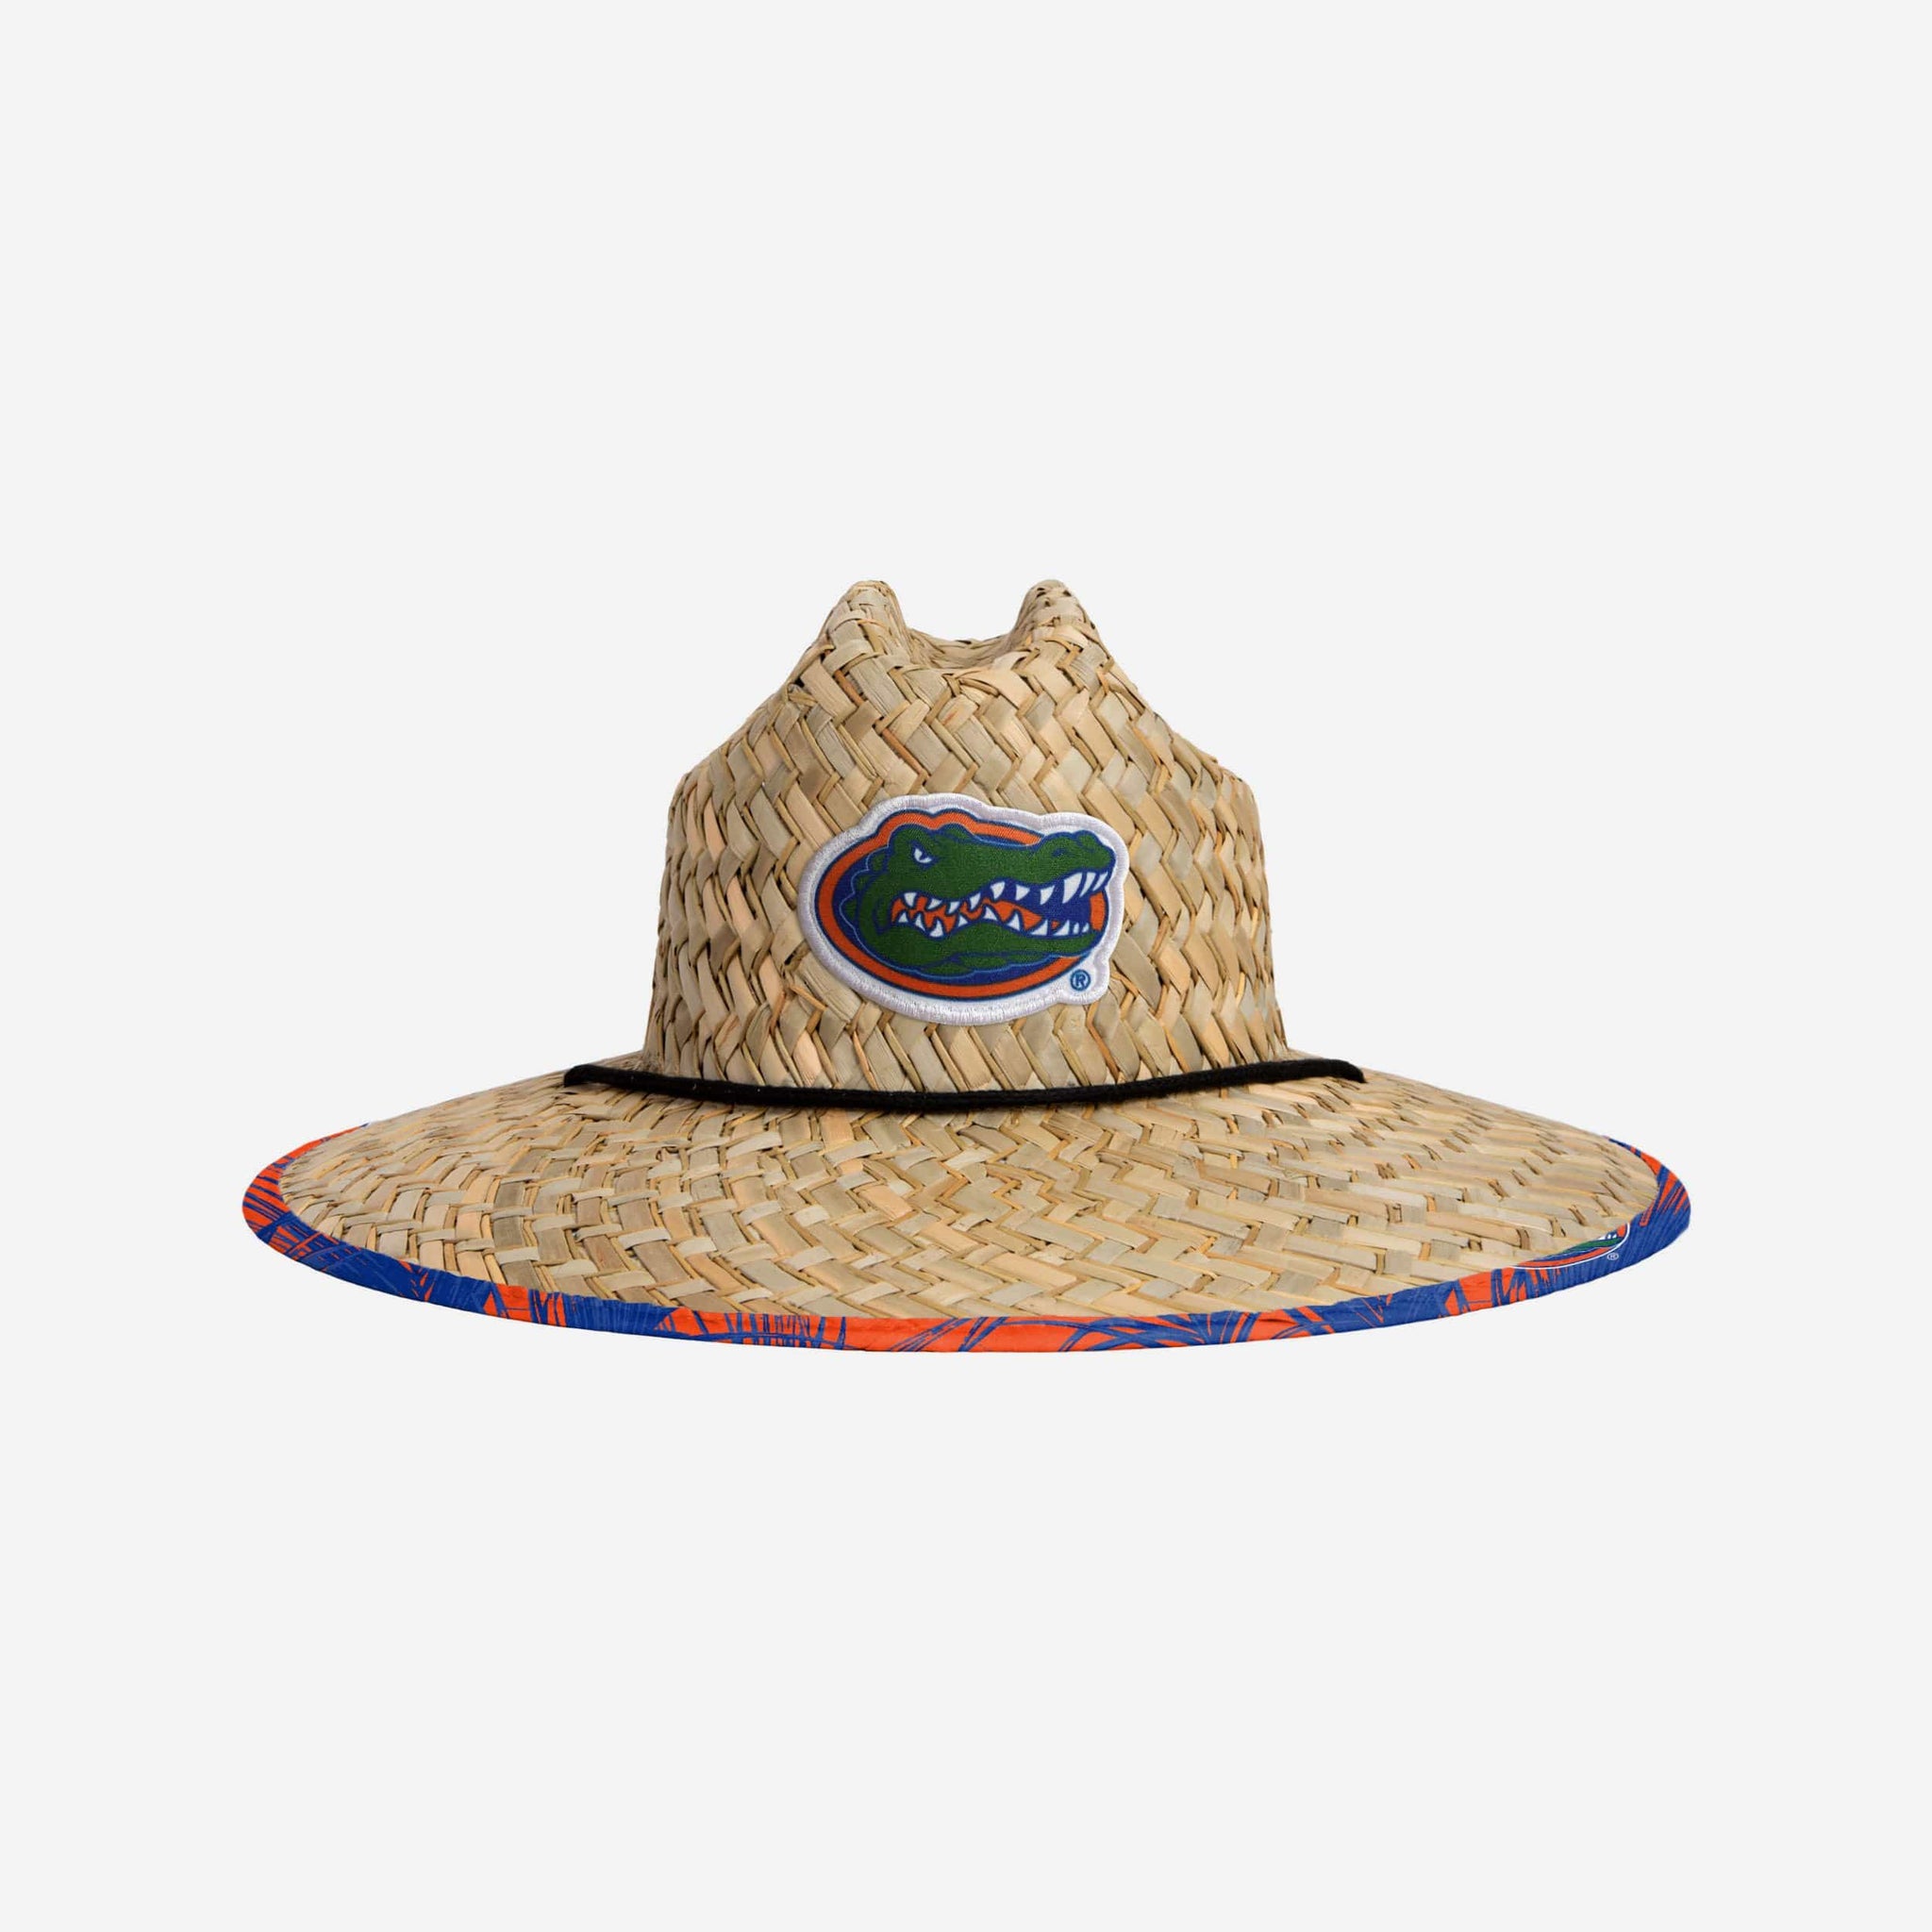 I thought a bucket hat would be a good addition to my Kraken gear